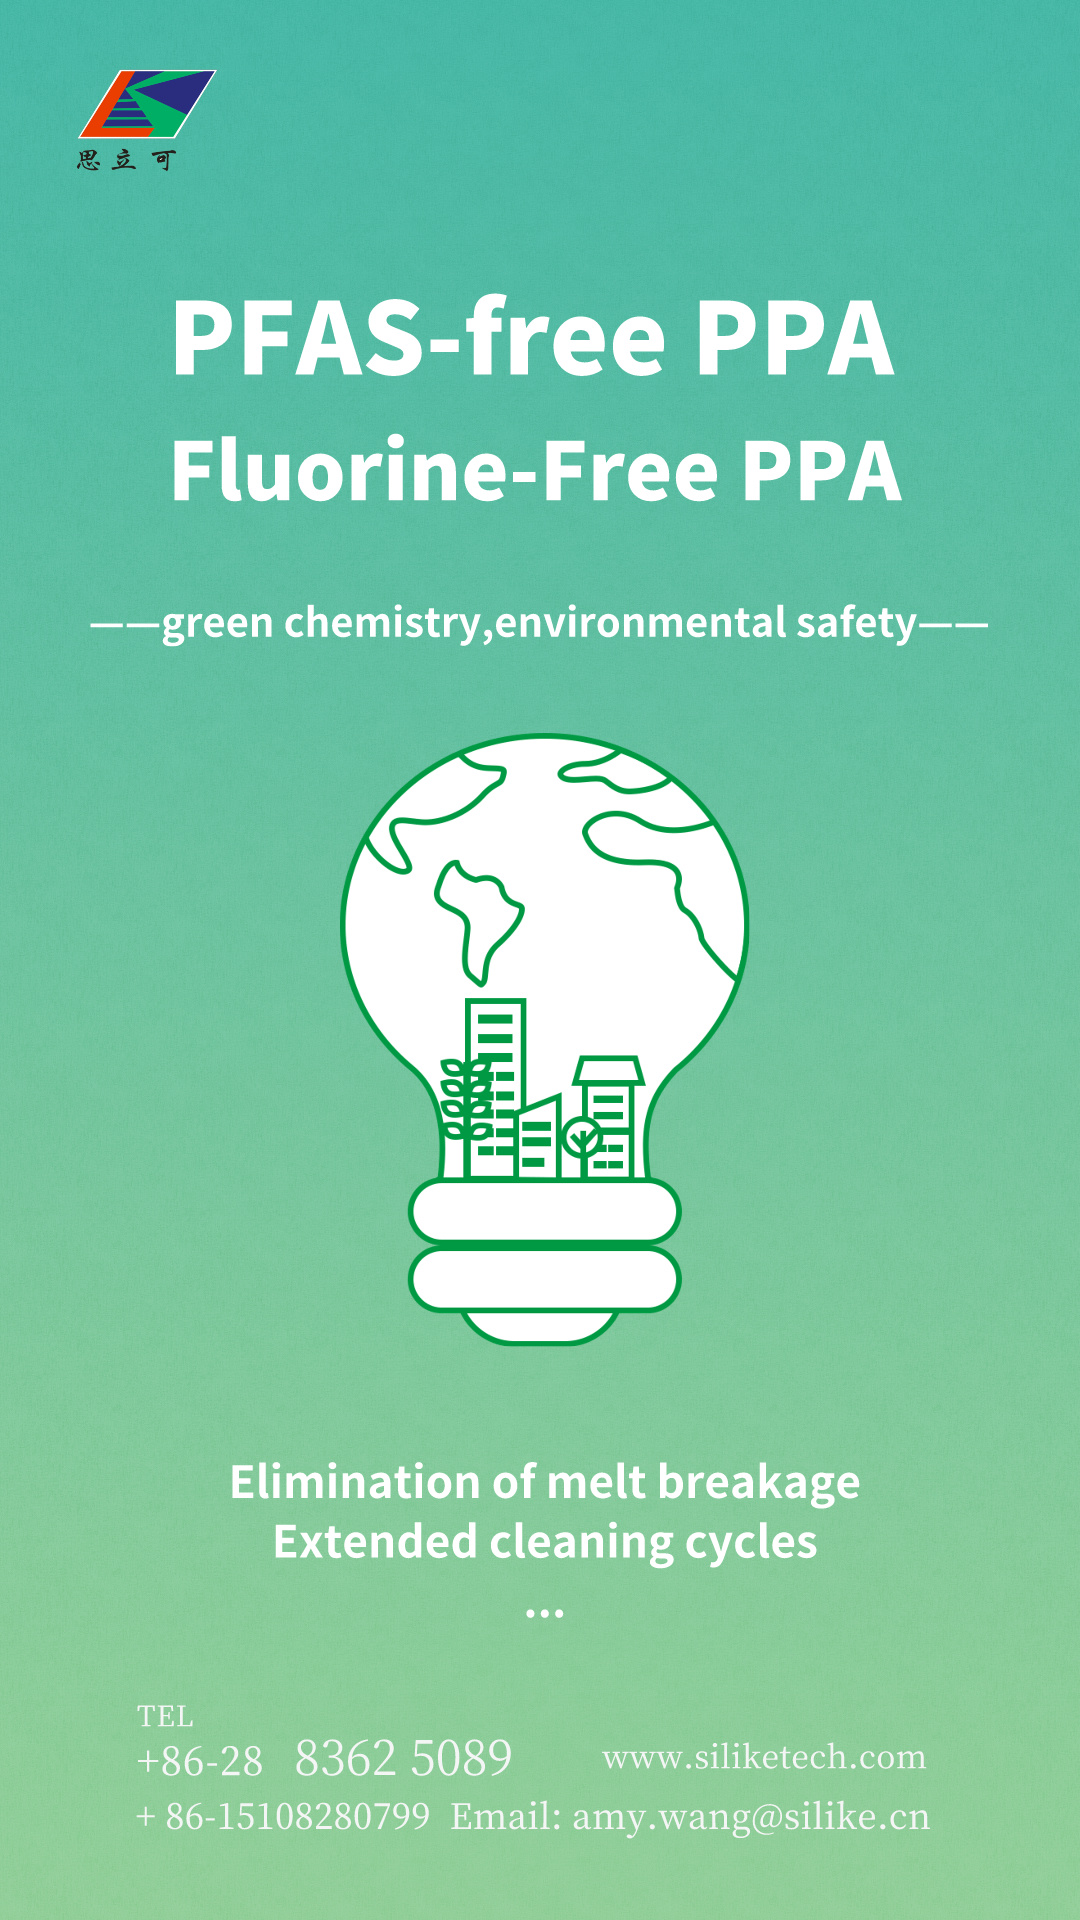 What is PFAS-free Polymer Processing Aids?